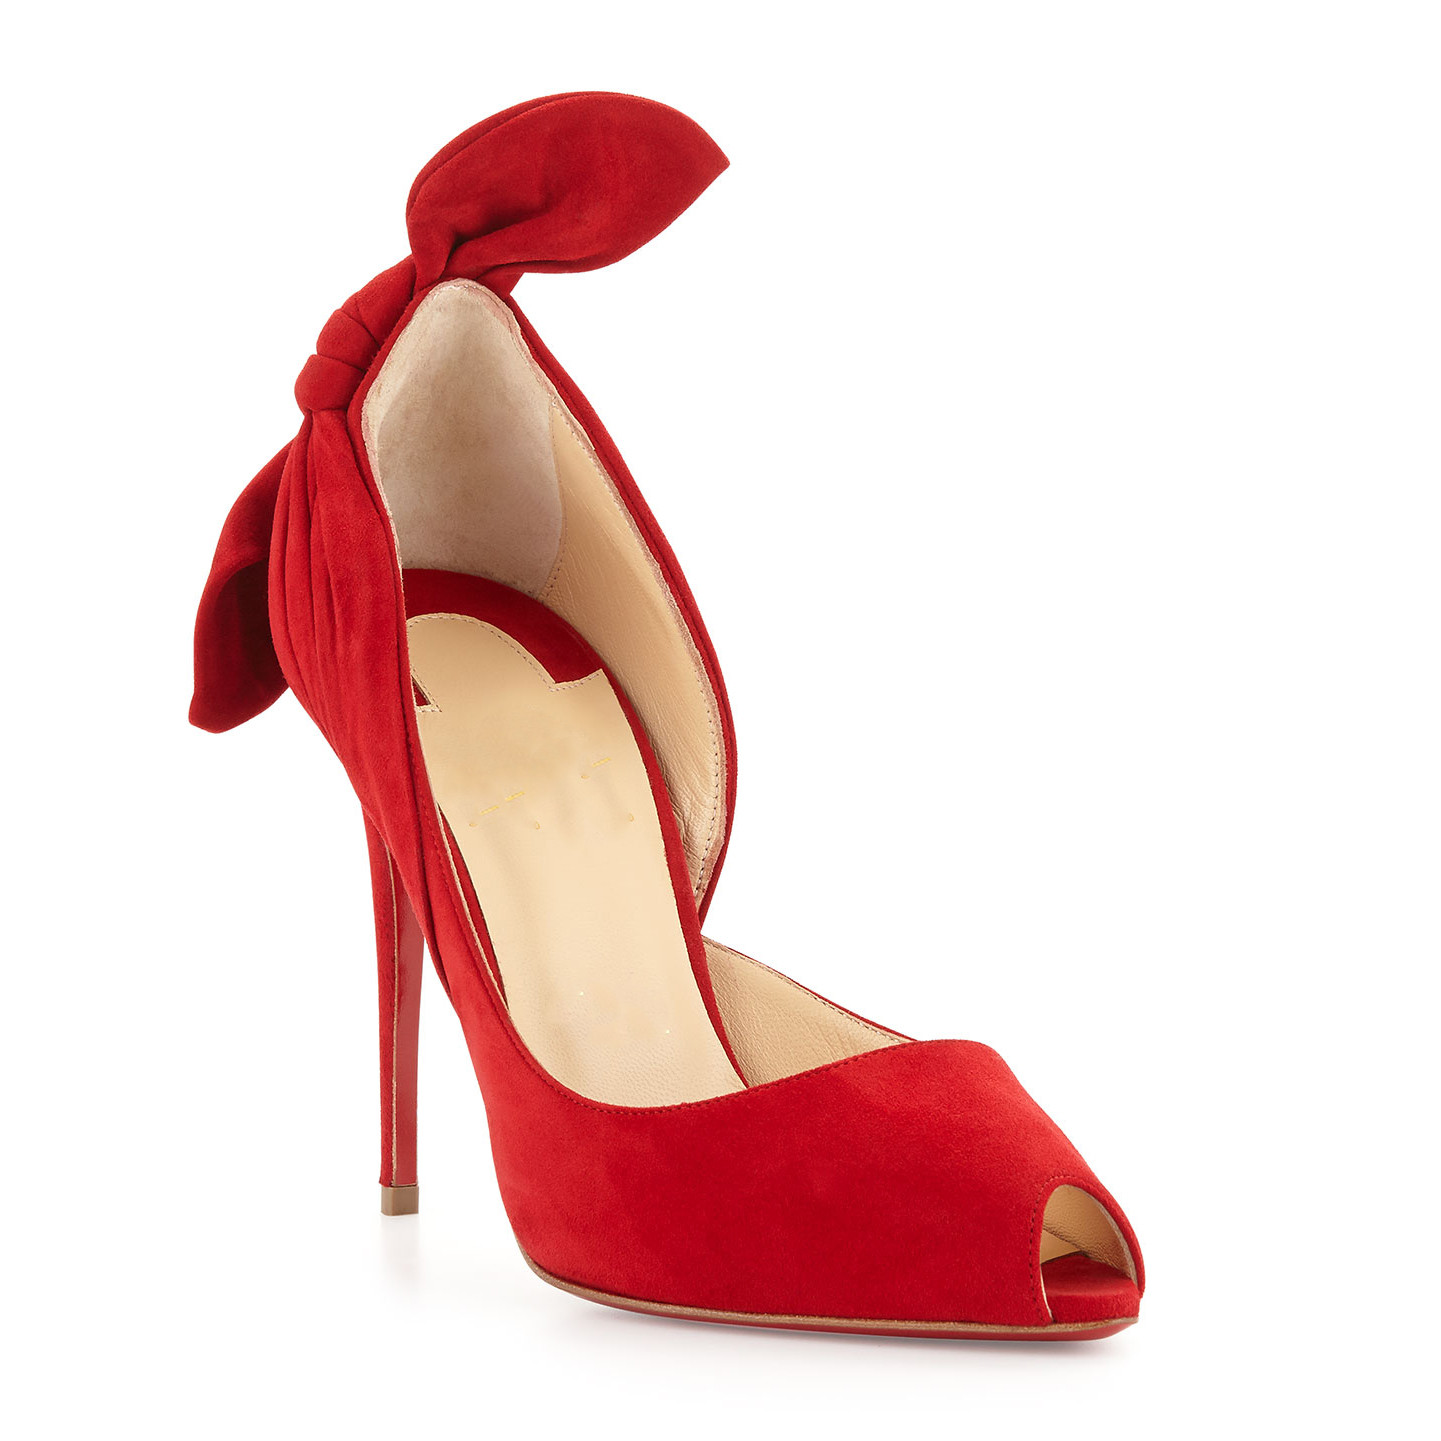 US$ 50.00 - stilettos peep toe red suede fashion sexy party shoes big ...